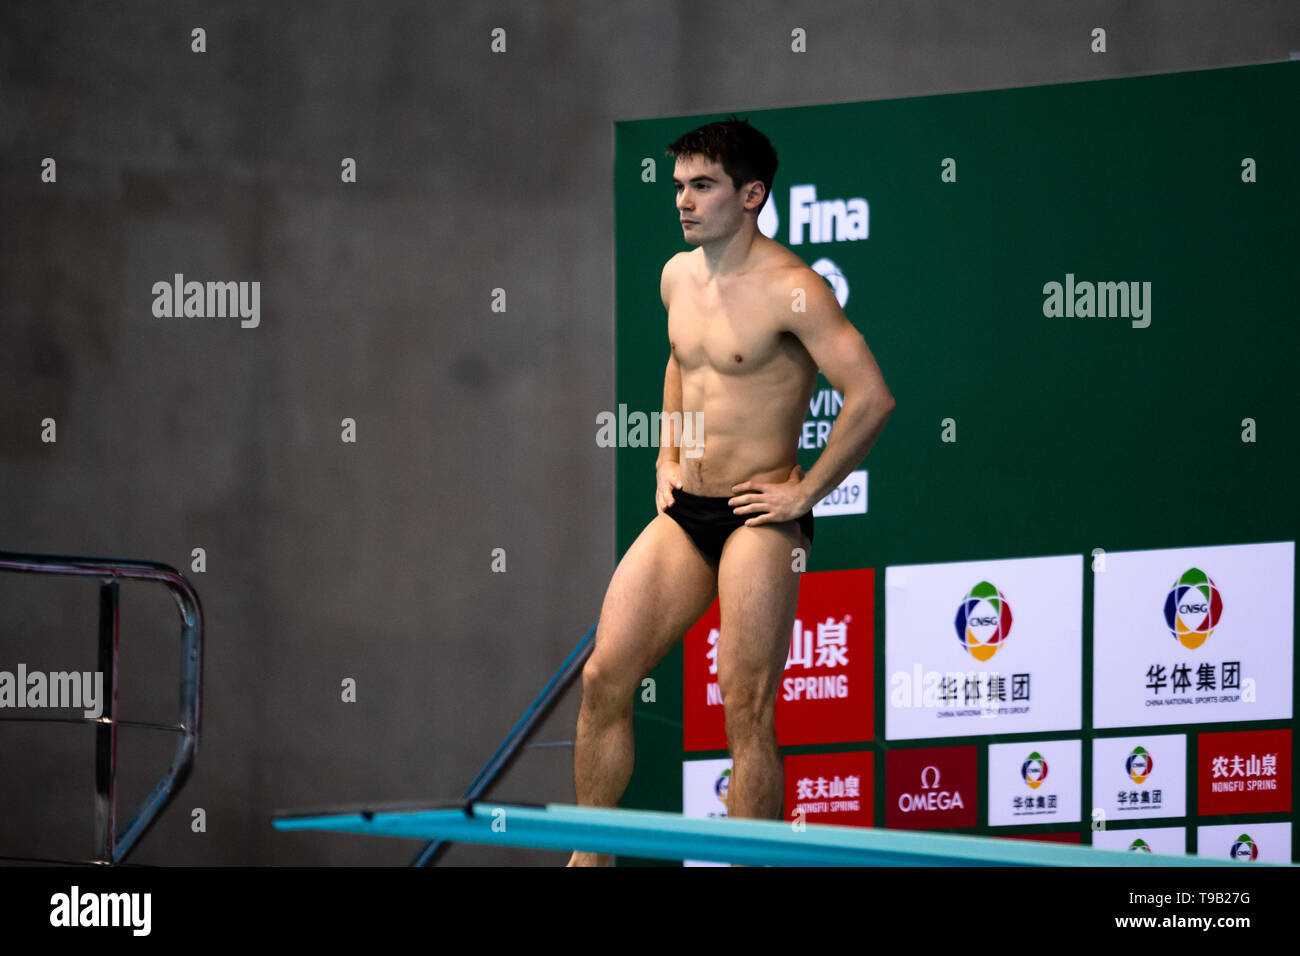 London, UK. 18th May, 2019. Daniel Goodfellow of Great Britain competes in Men’s 3m Springboard during FINA/CNSG Diving World Series Final at London Aquatics Centre on Saturday, 18 May 2019. London England.  Credit: Taka G Wu/Alamy Live News Stock Photo